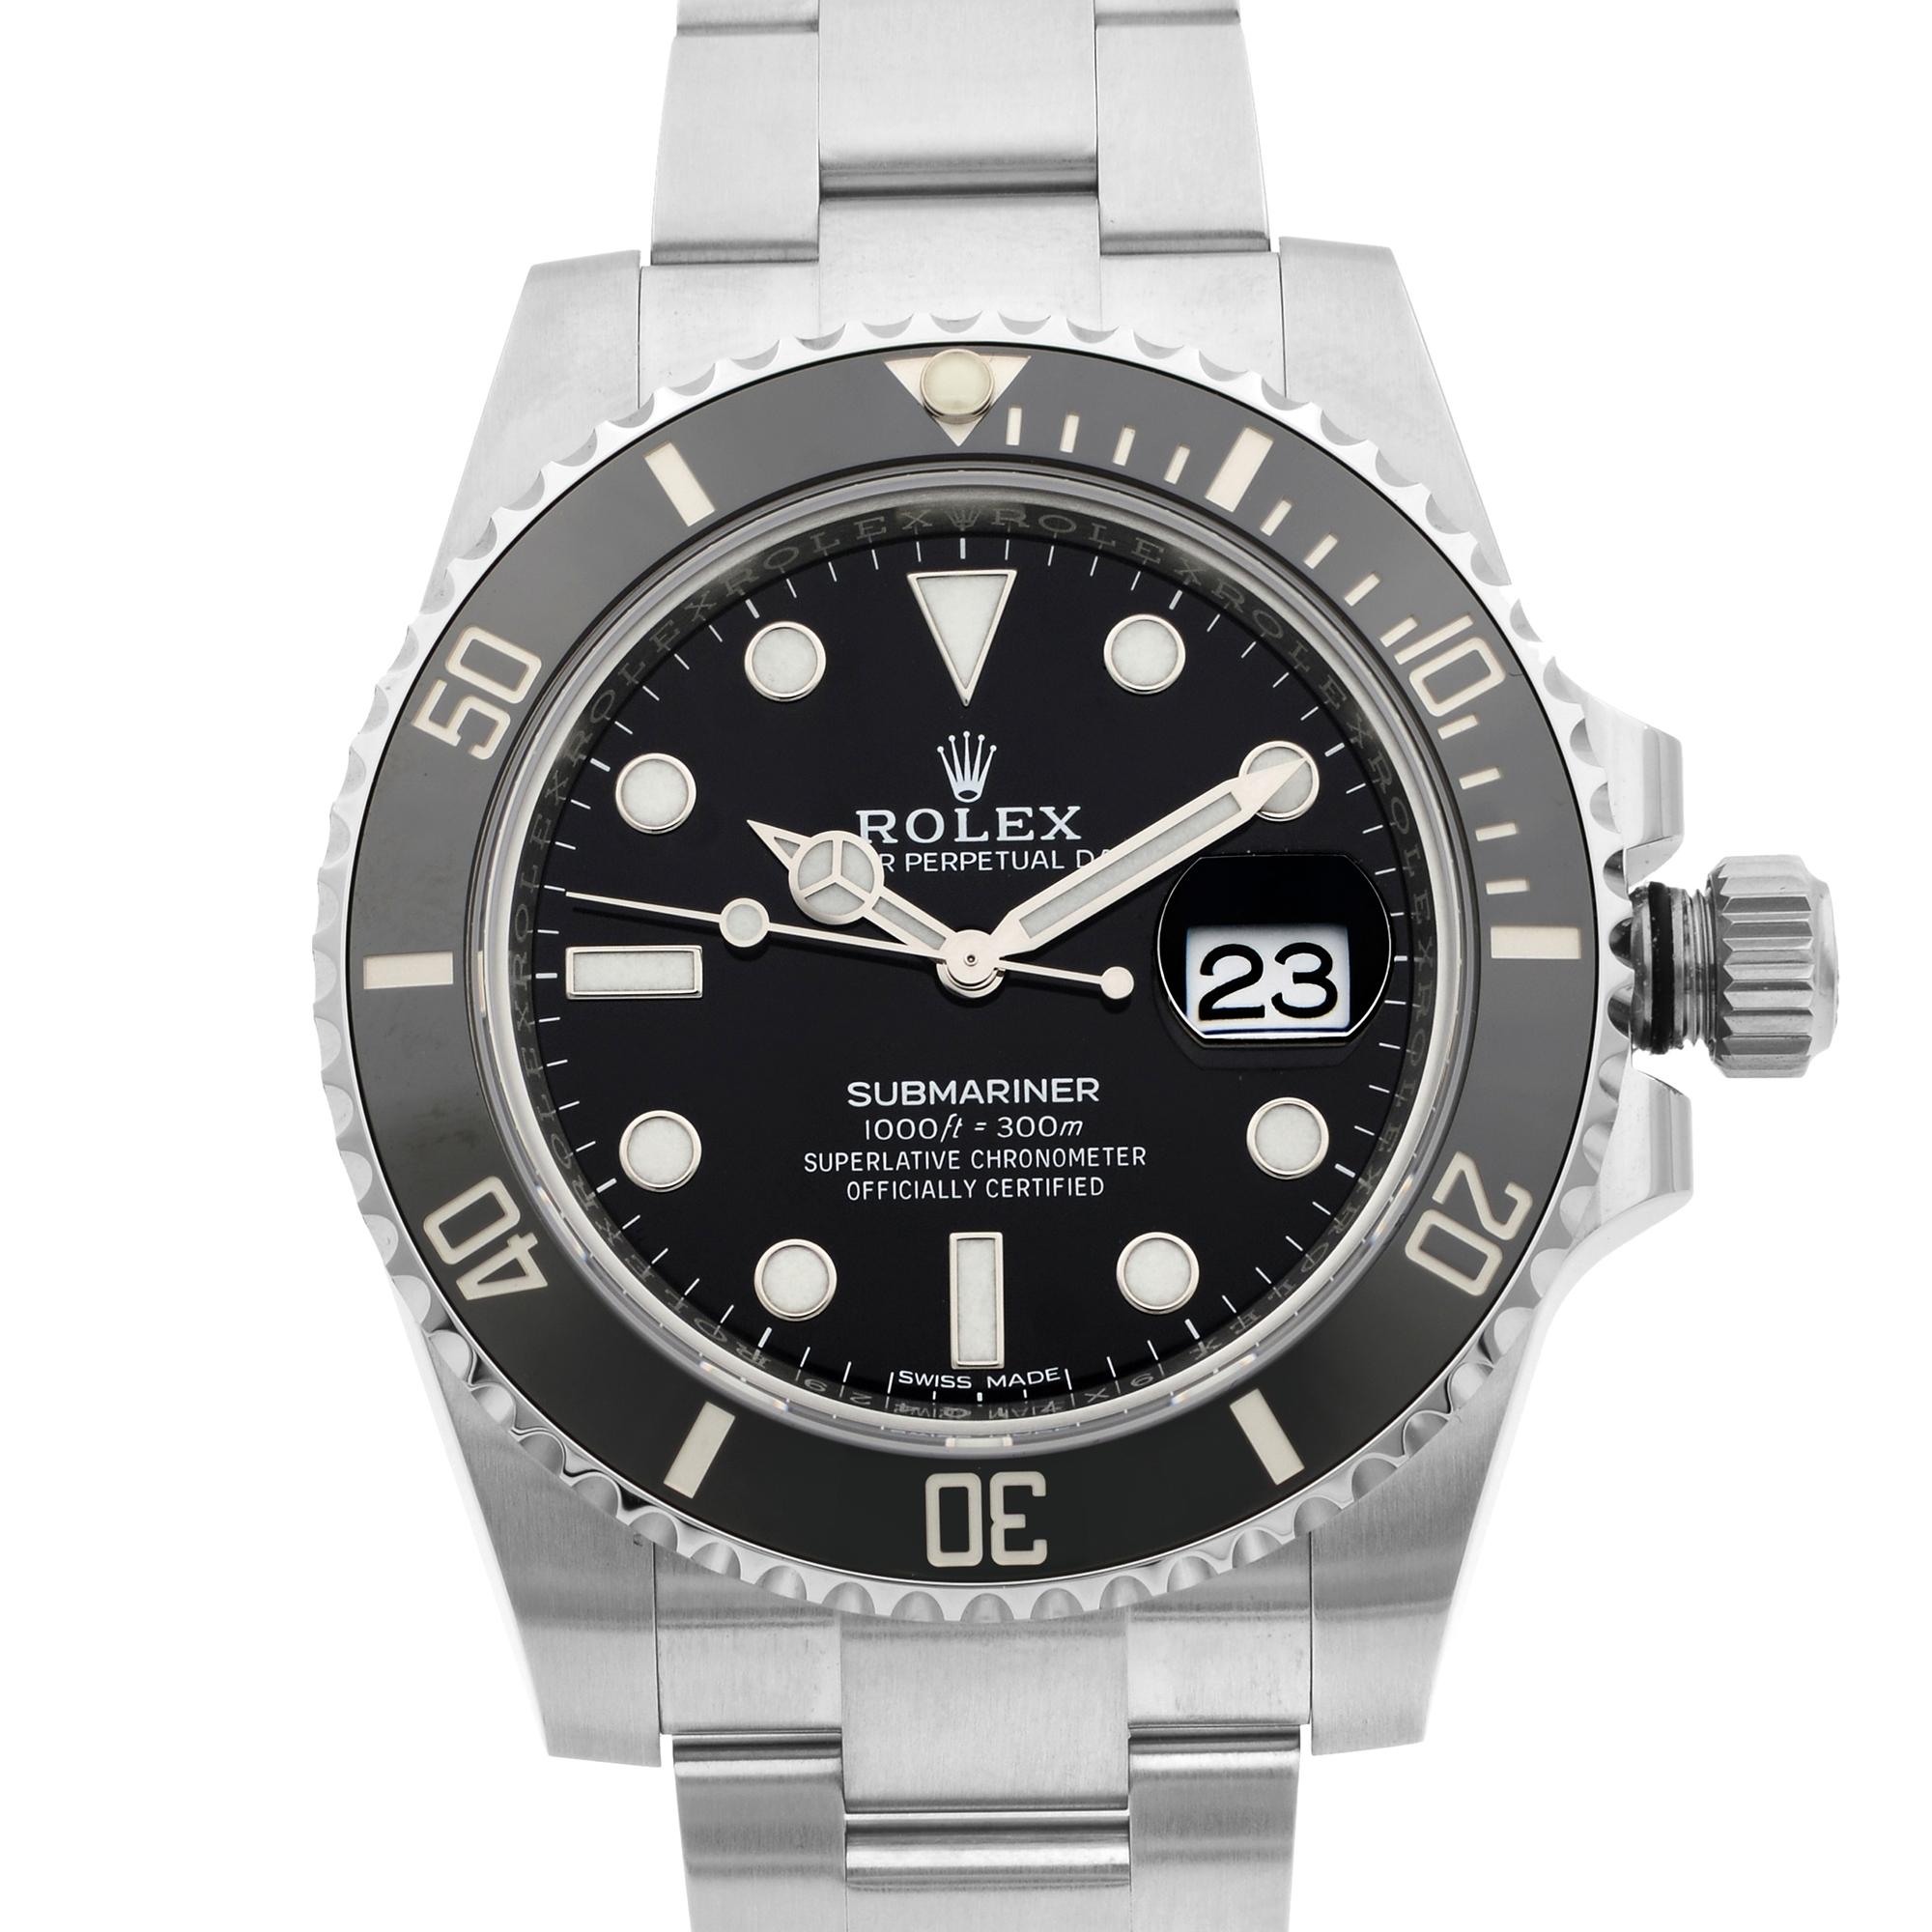 New Old Stock Discontinued Model. Unworn Rolex Oyster Perpetual Submariner Stainless Steel Black Dial Mens Watch. This Beautiful Timepiece Features: Stainless Steel Case with a Stainless Steel Rolex Oyster Bracelet, Uni-Directional Rotating